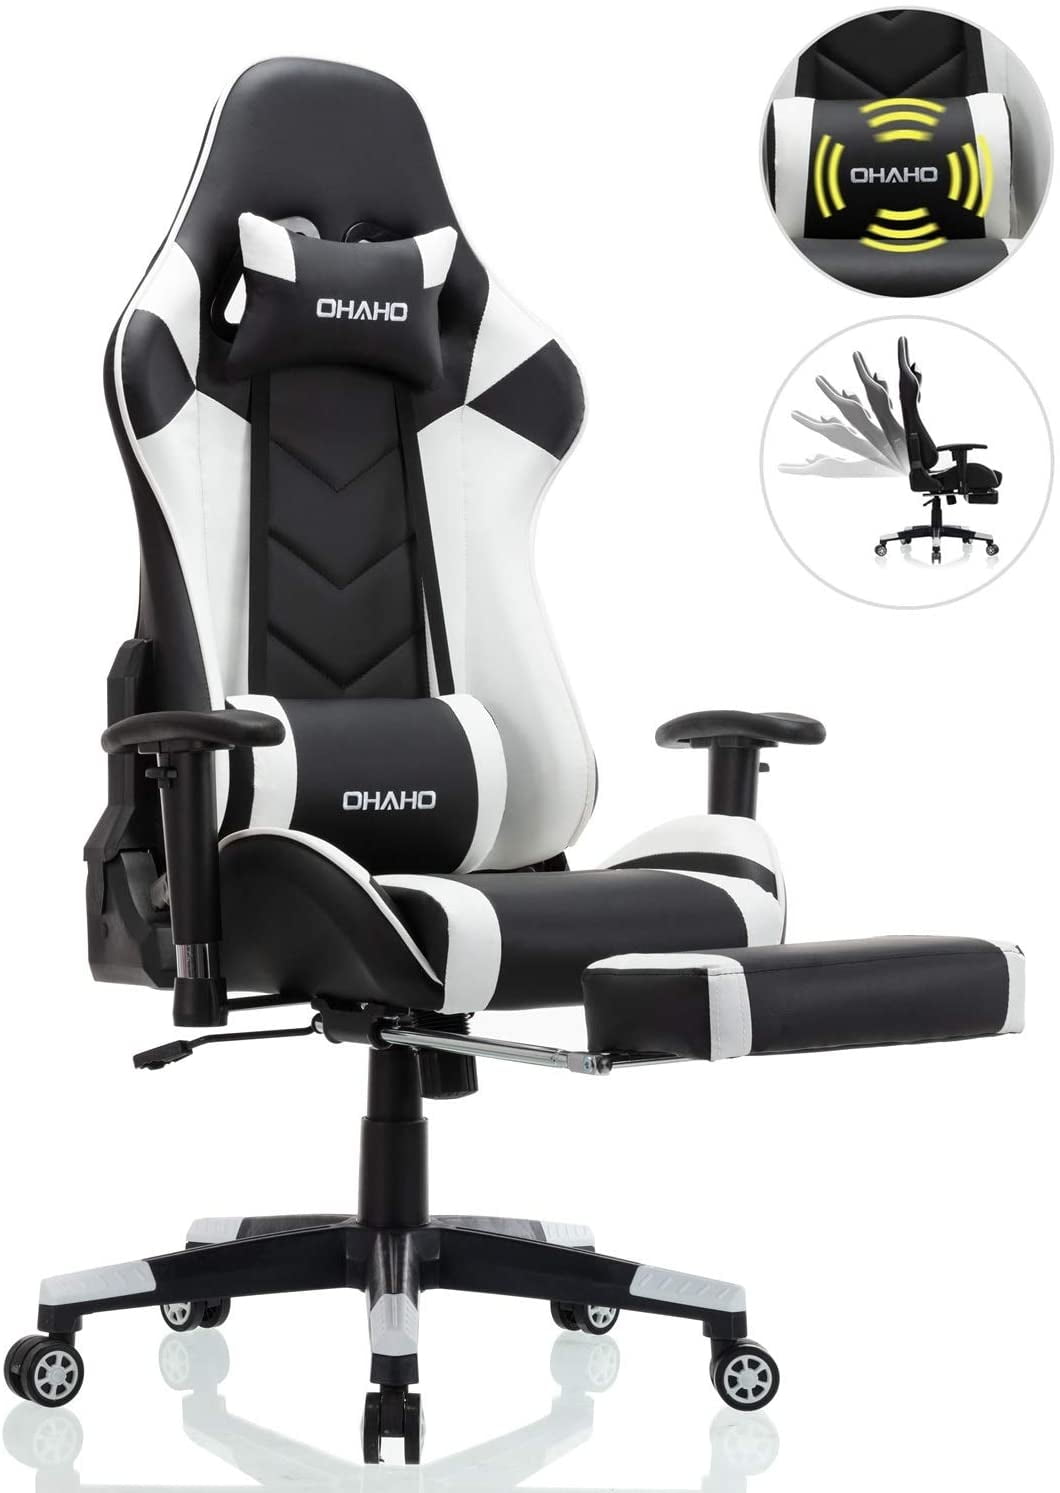 Office Racing PU Leather Recliner,Adjustable Backrest /& Height Swivel Ergonomic Teenage Adult Gift Chair. J Gaming Chair